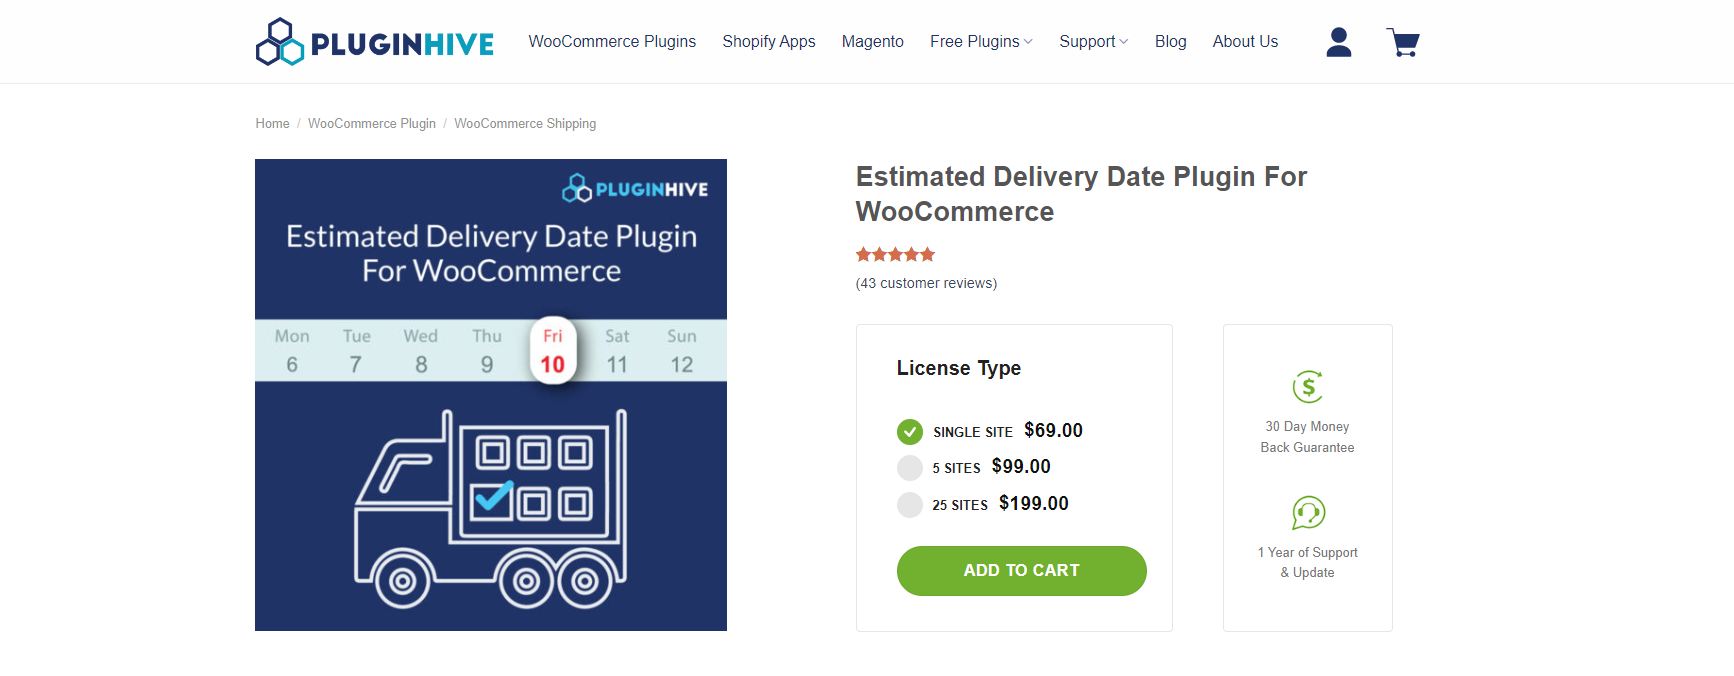 Estimated Delivery Date Plugin For WooCommerce